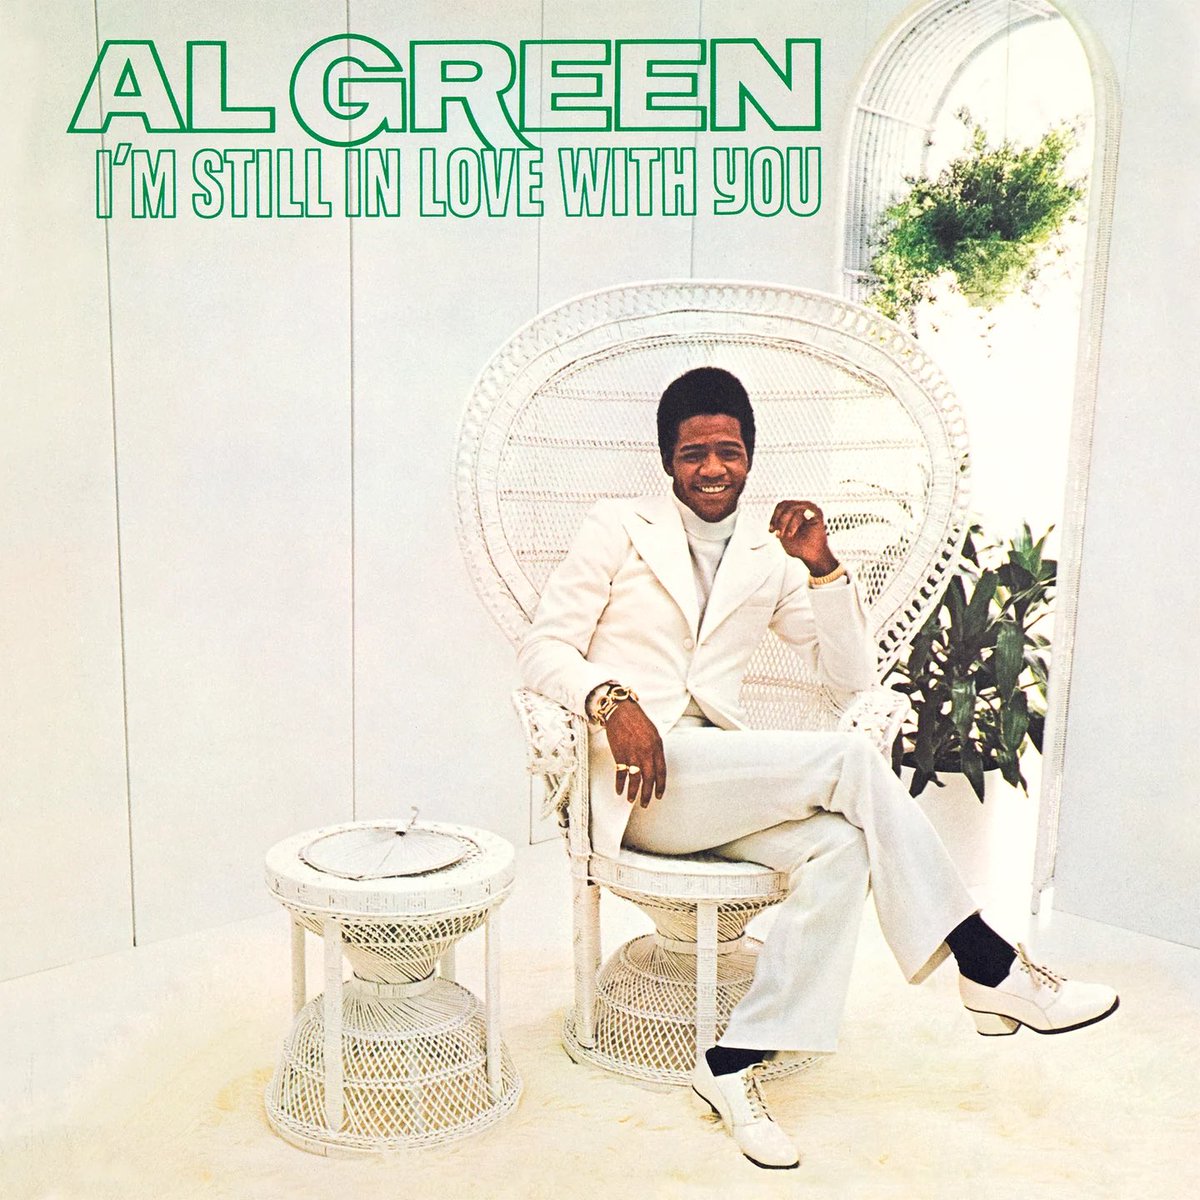 Night #2 of nothing but Al Green.